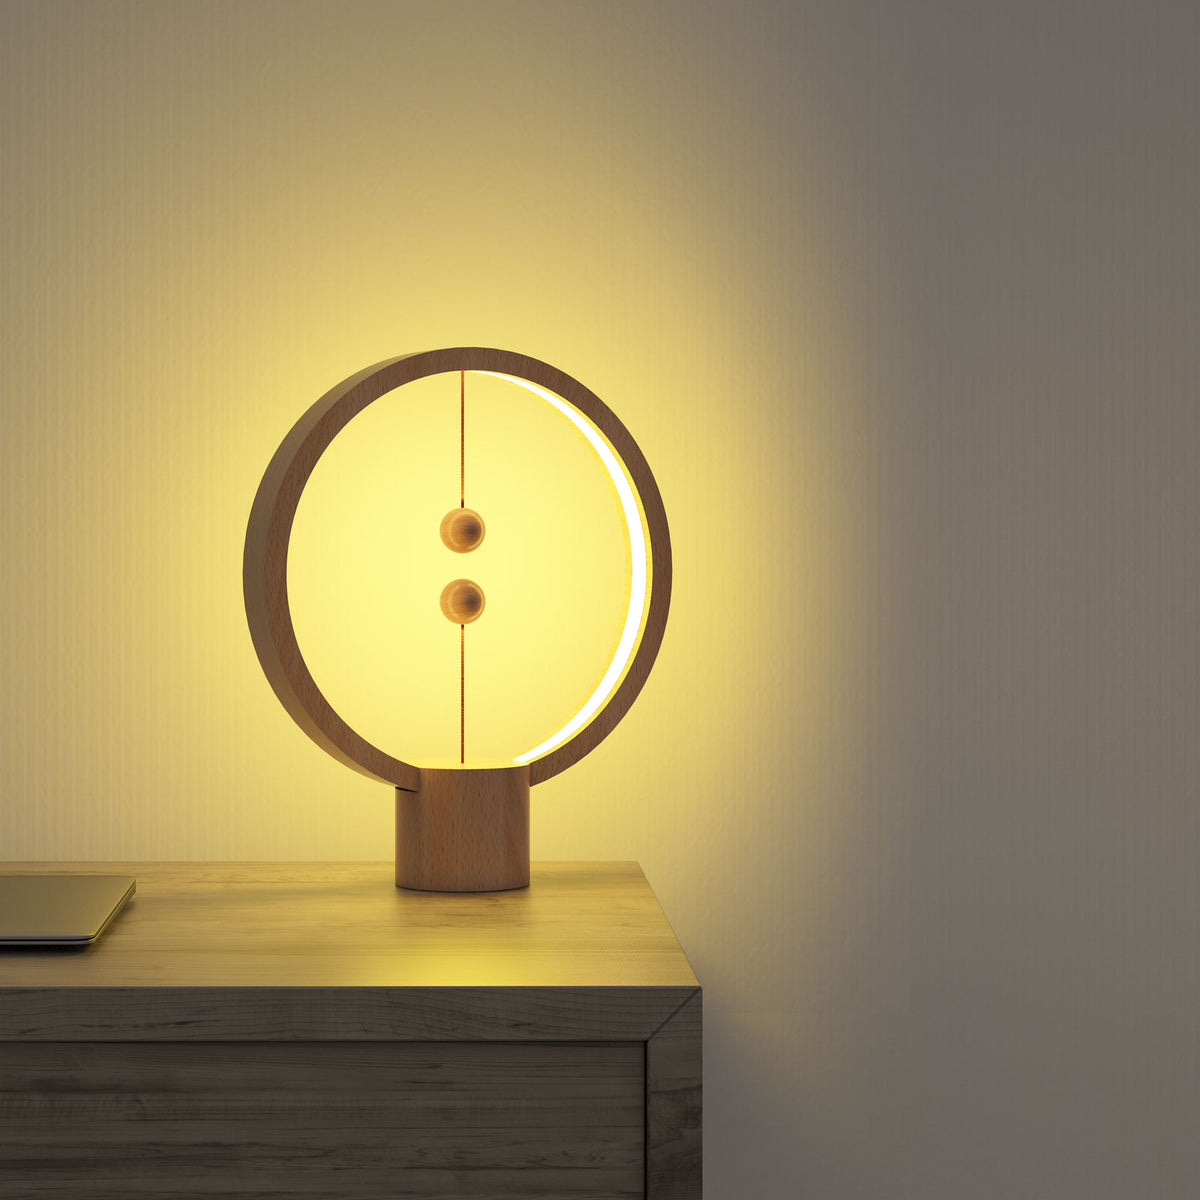 The Heng Round Light Wood lights the wall in a room.